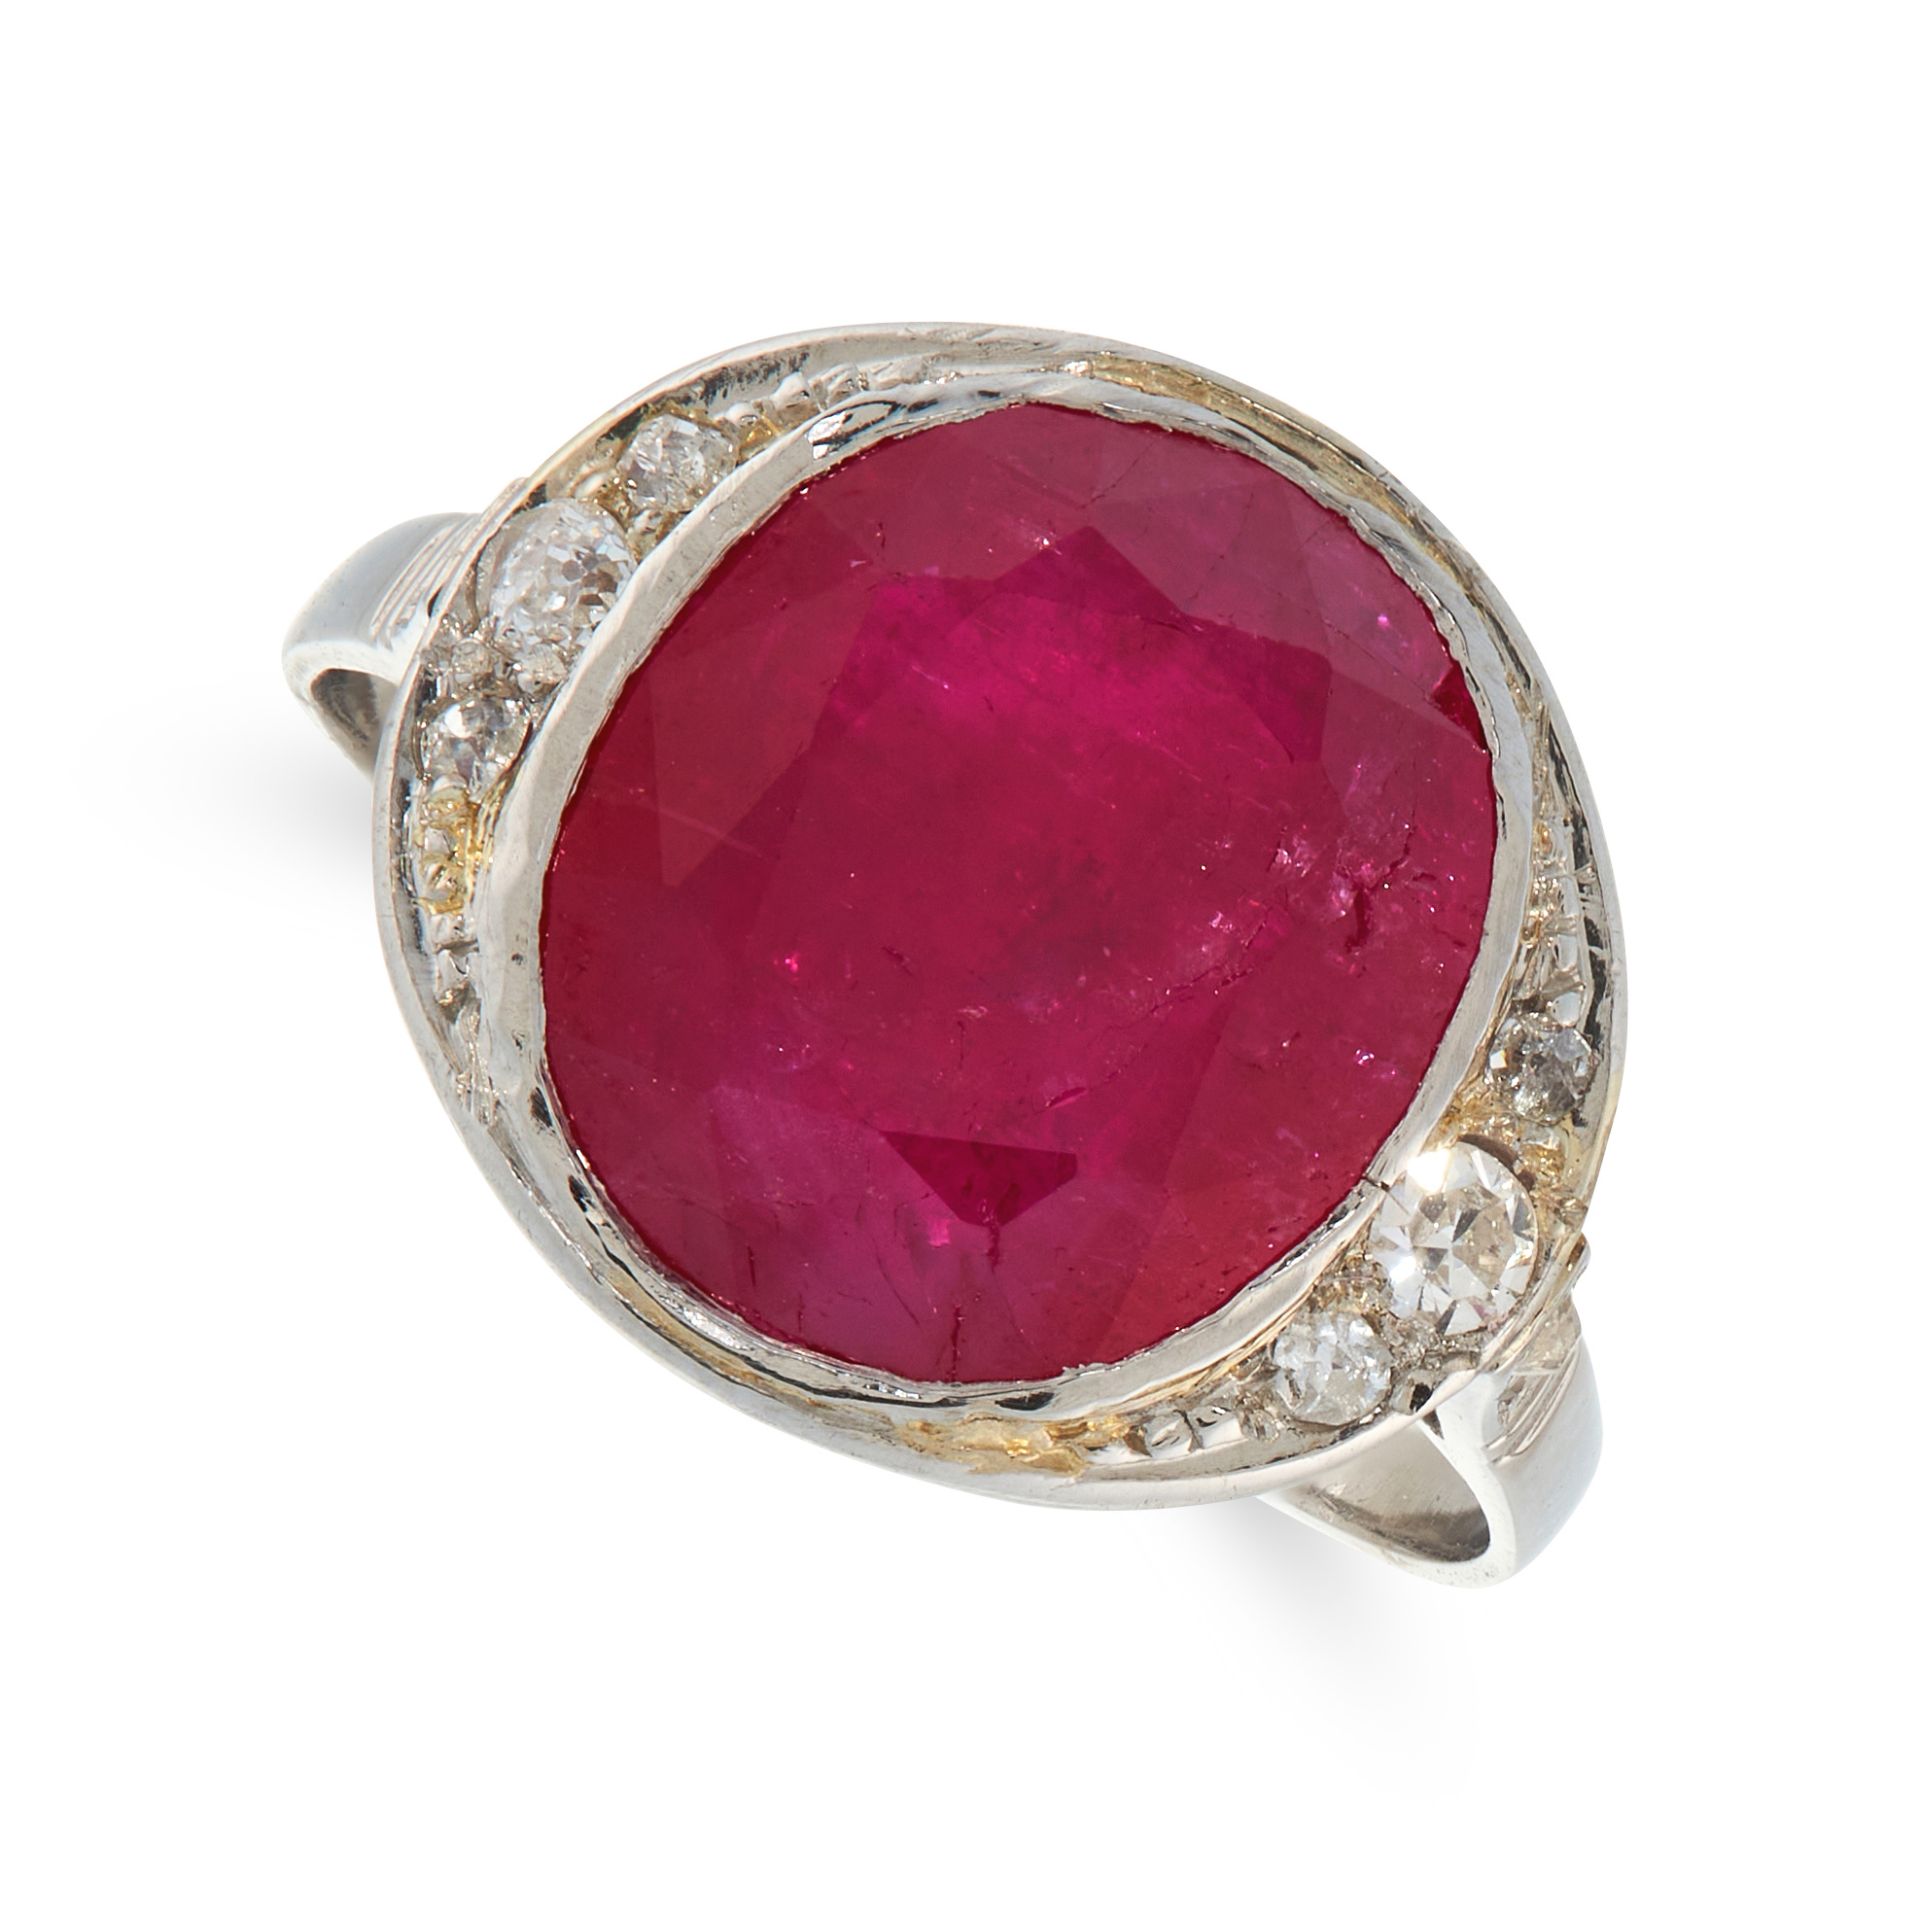 A BURMA NO HEAT RUBY AND DIAMOND DRESS RING set with an oval cut ruby of 6.21 carats within a border